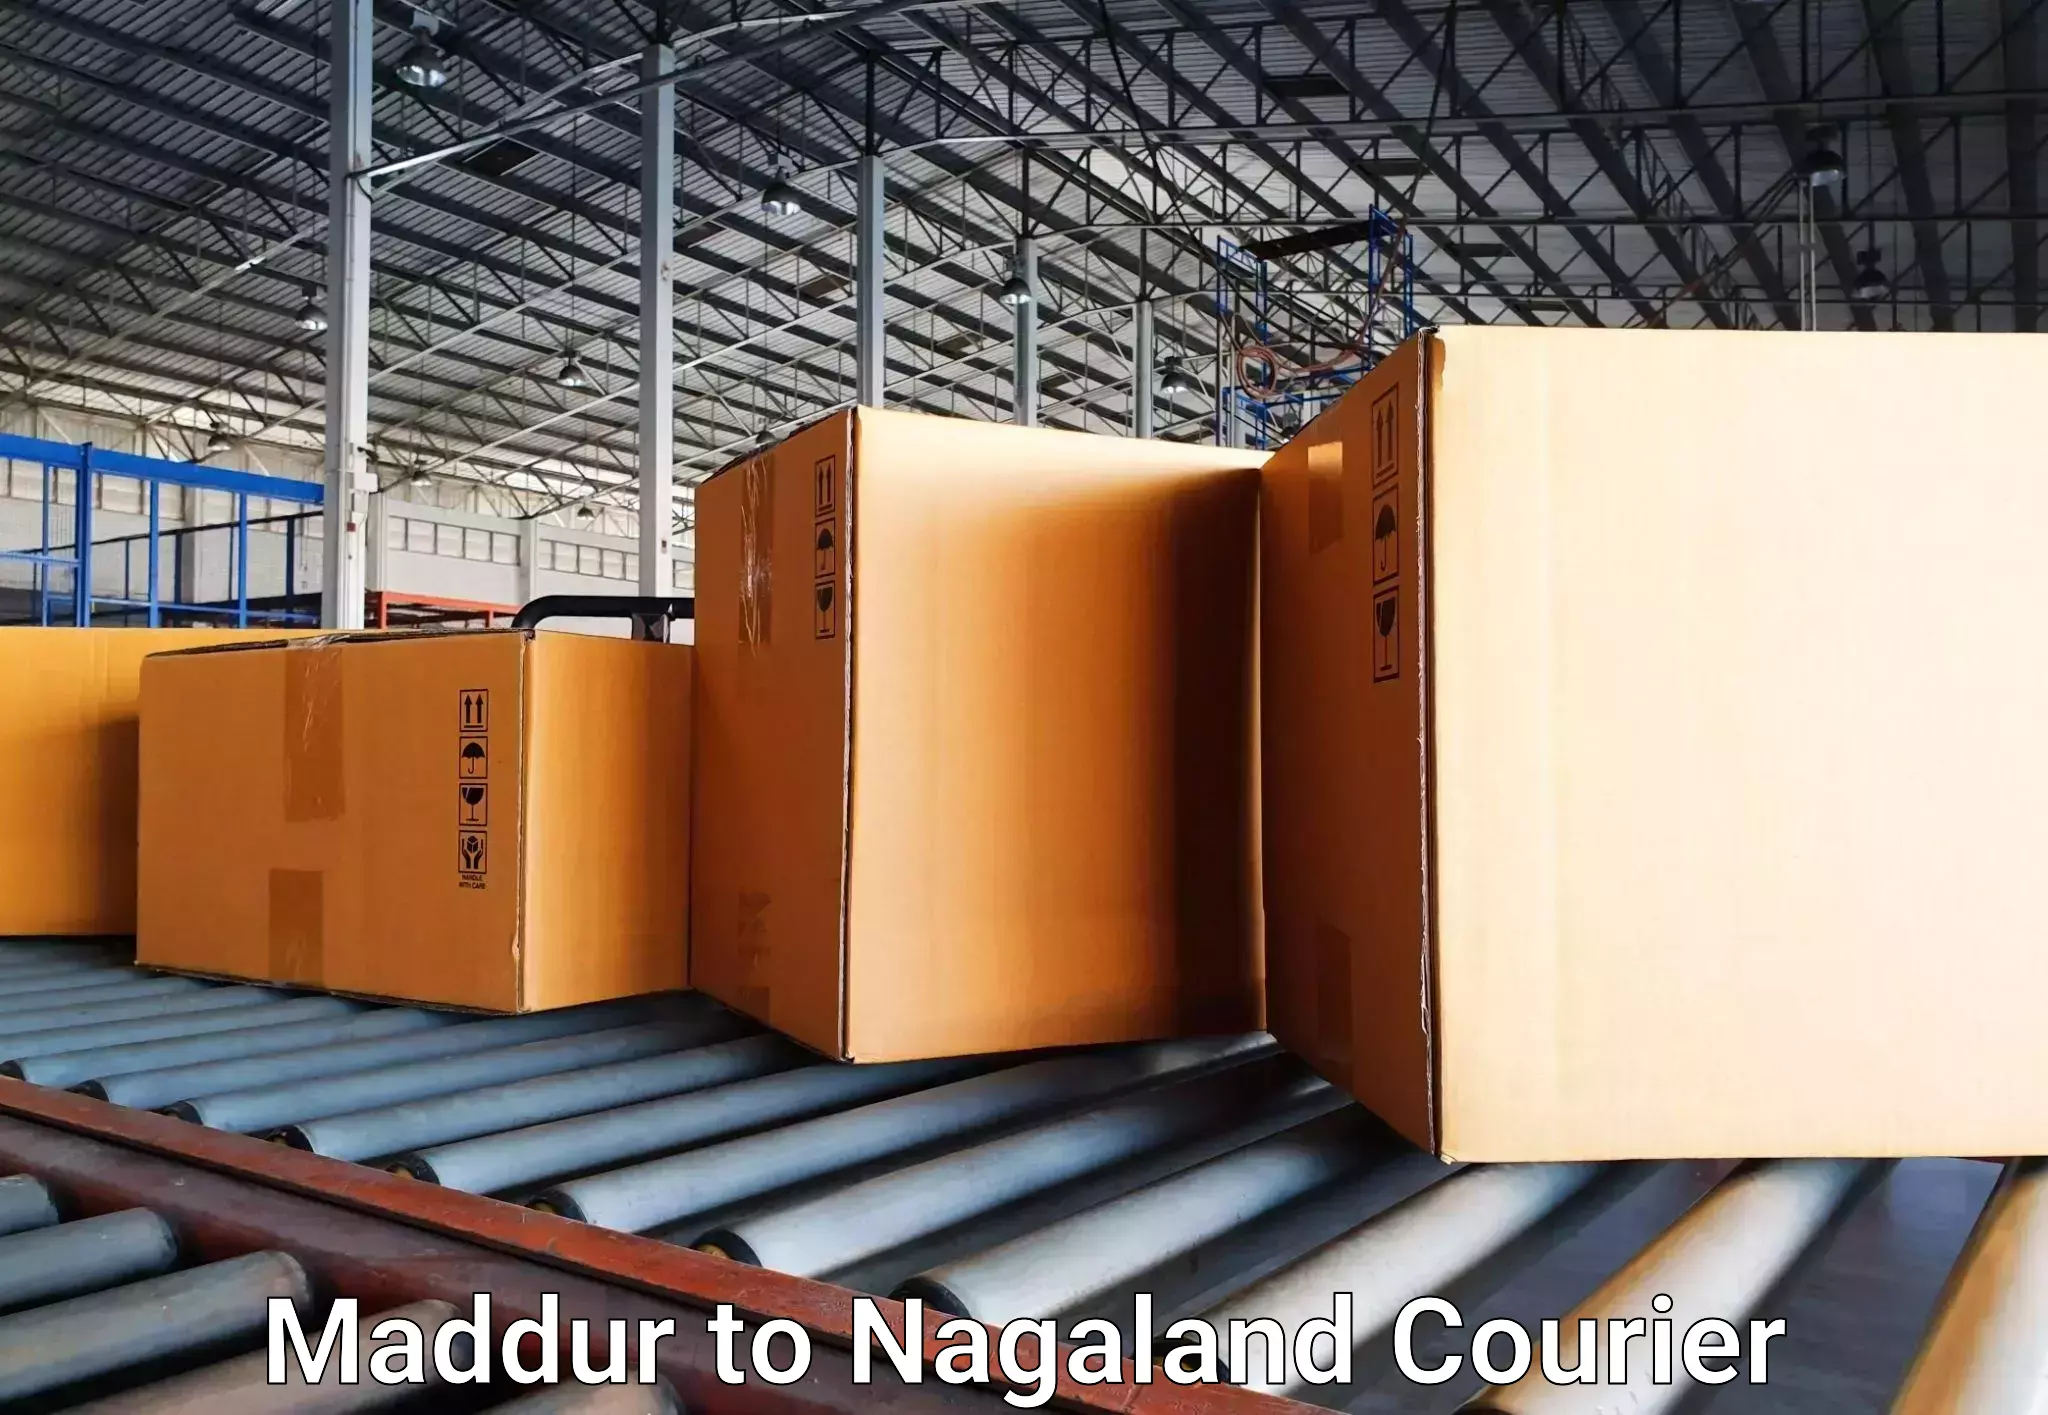 Luggage transport consultancy Maddur to Nagaland